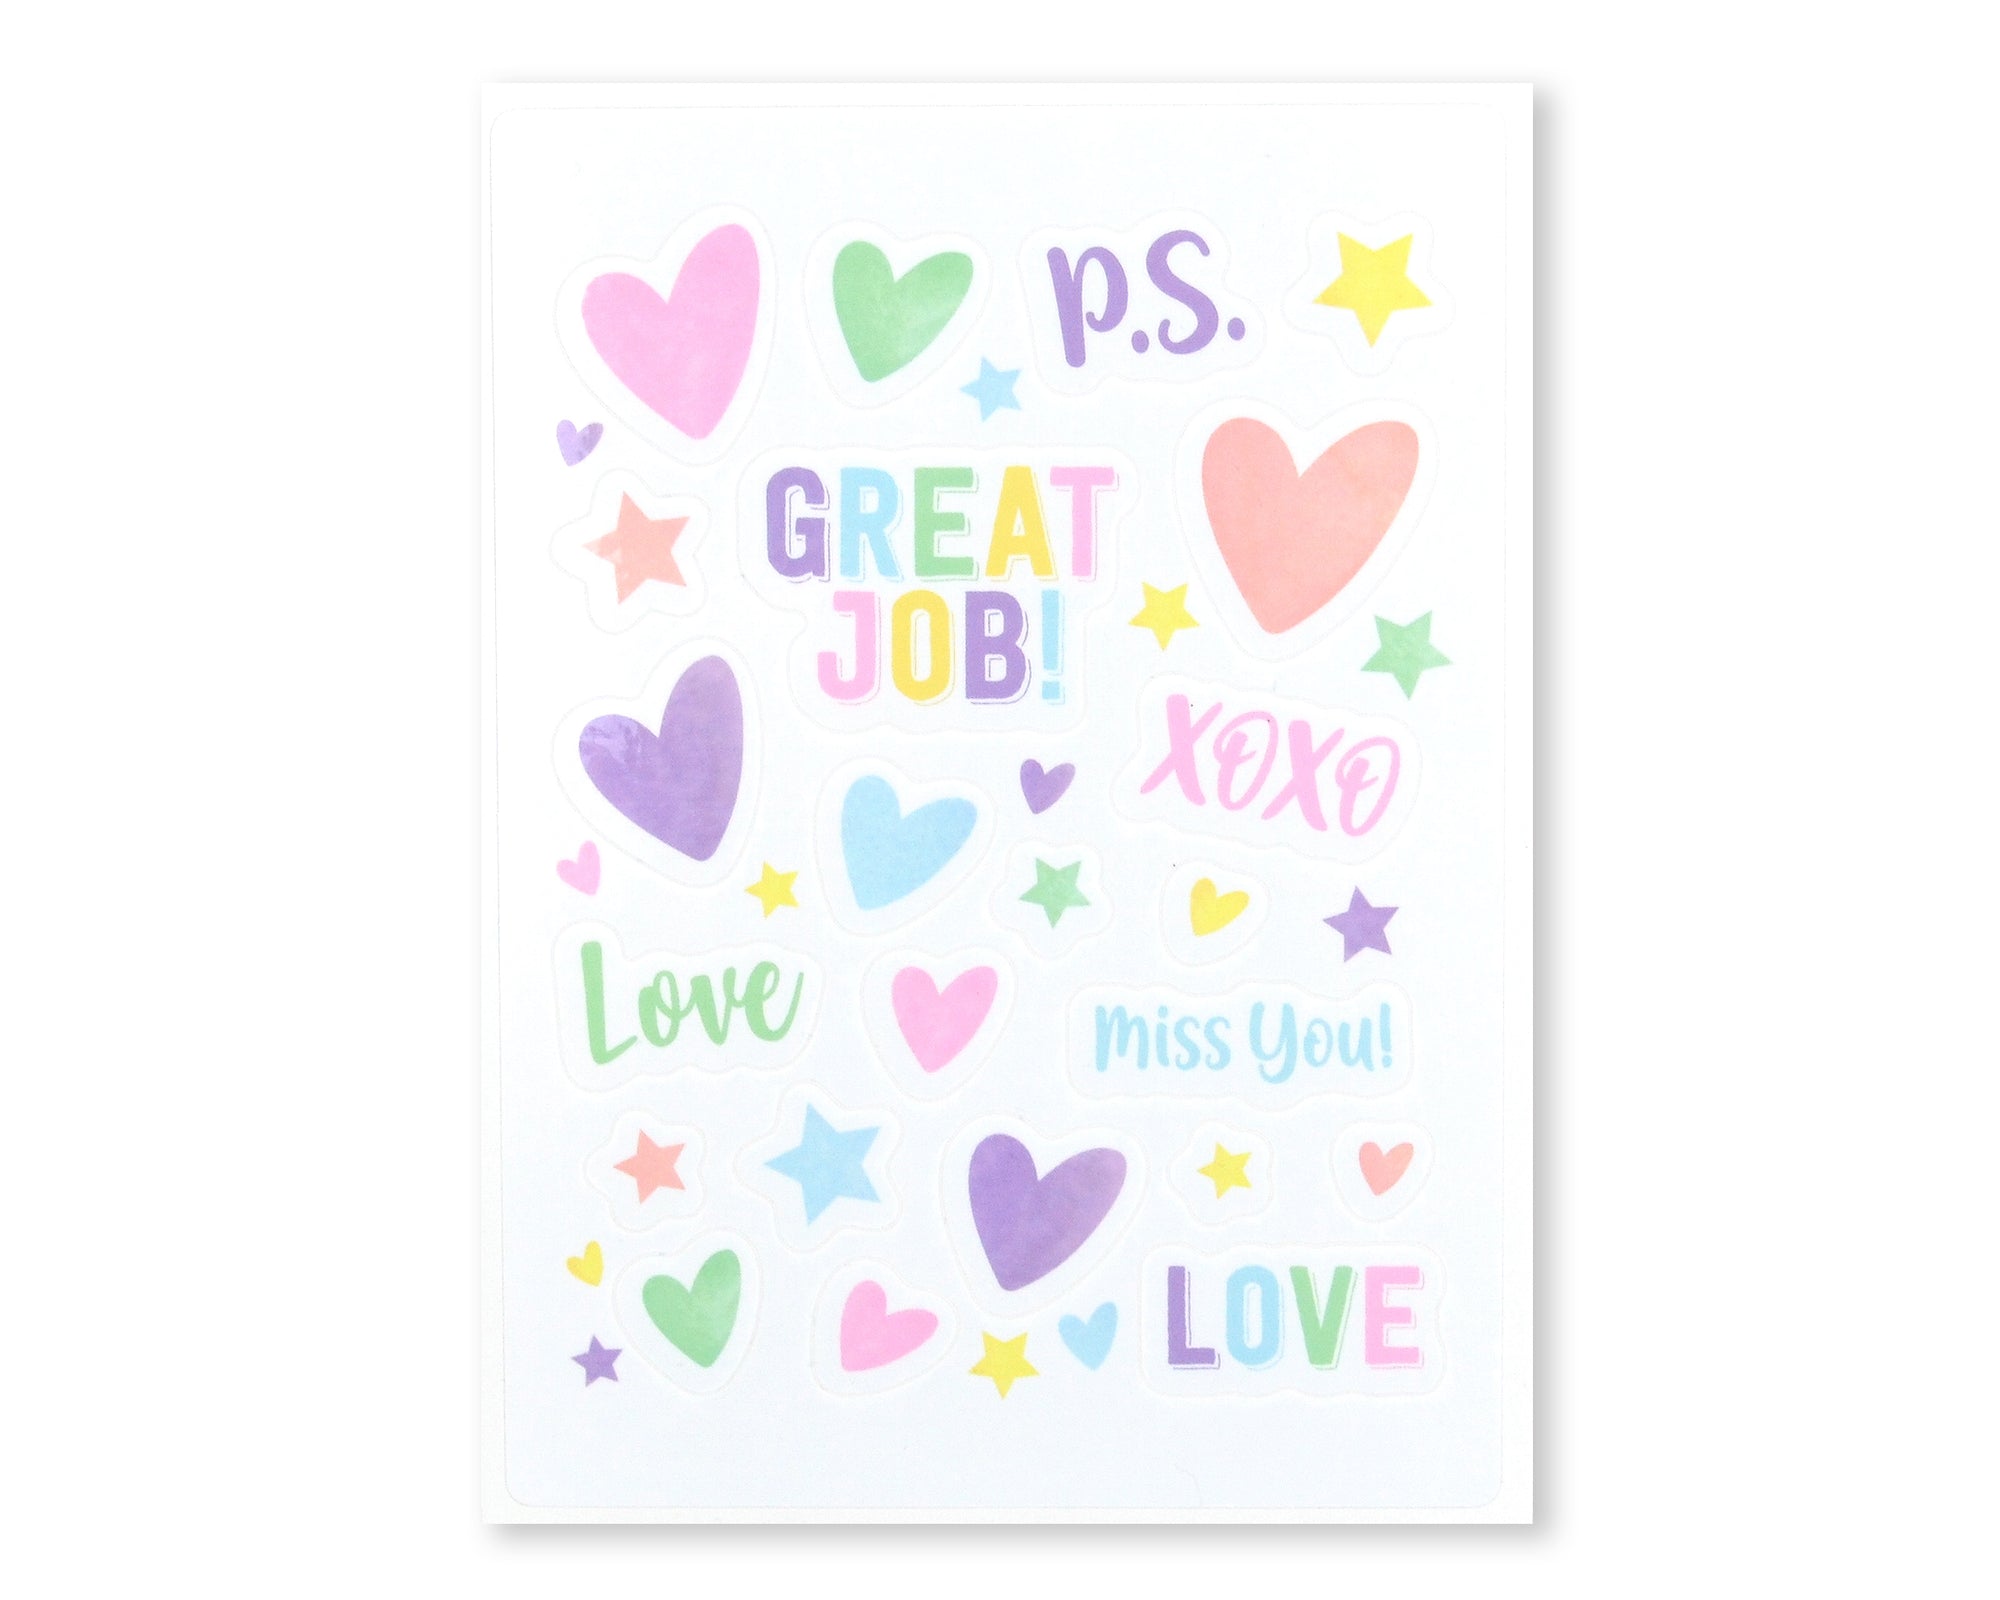 Heart, Star & Fun Sayings Stickers for Kids